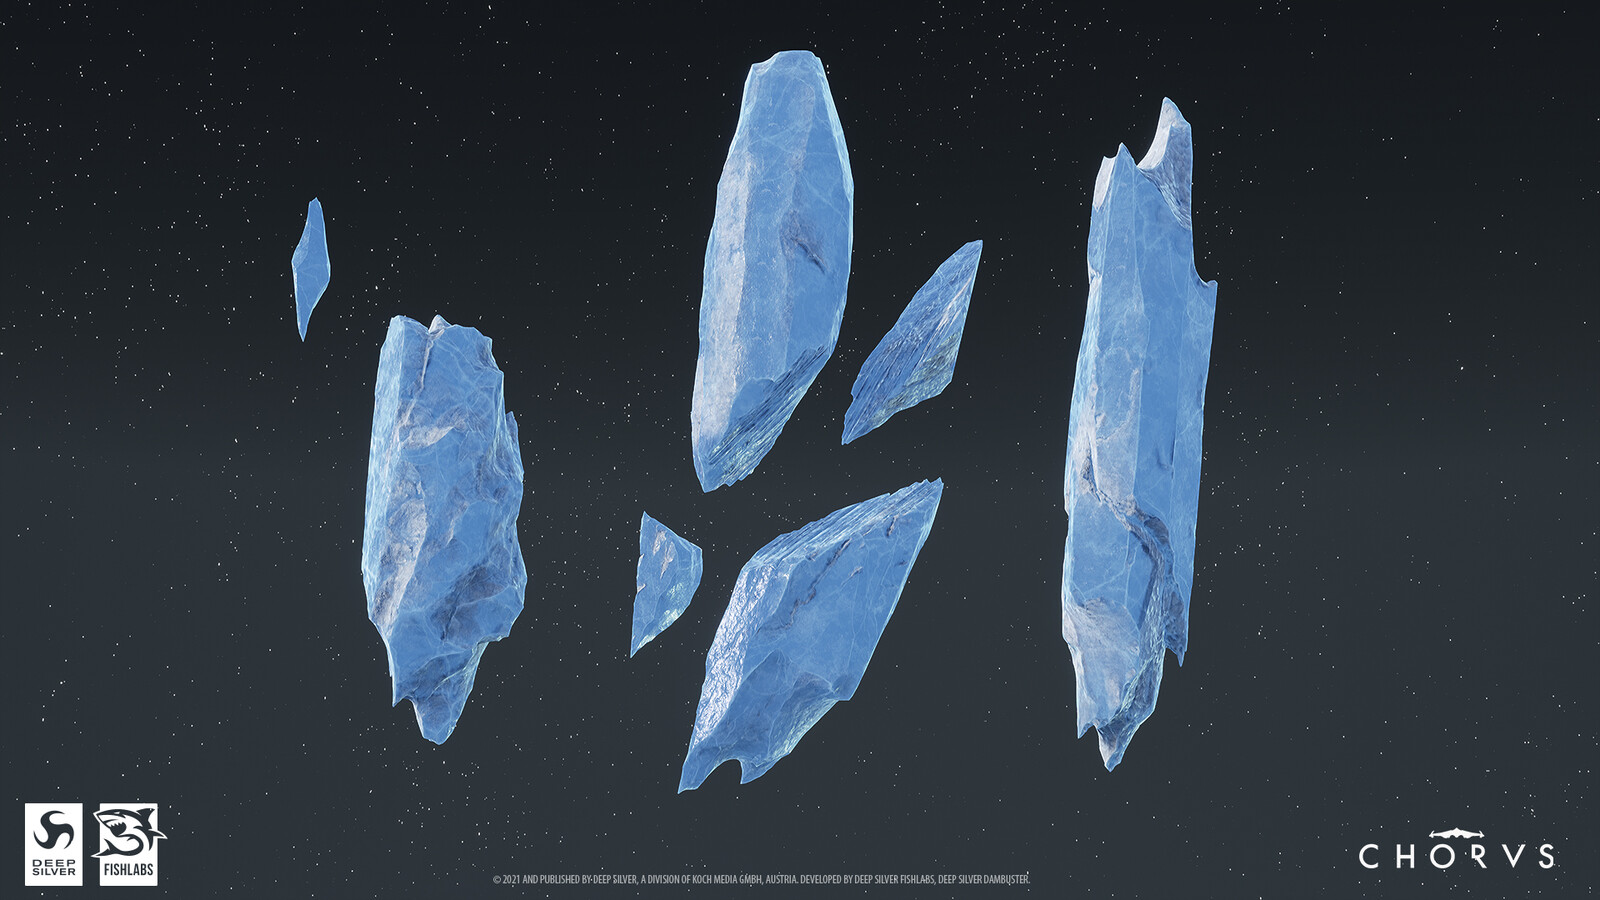 Large ice asteroids